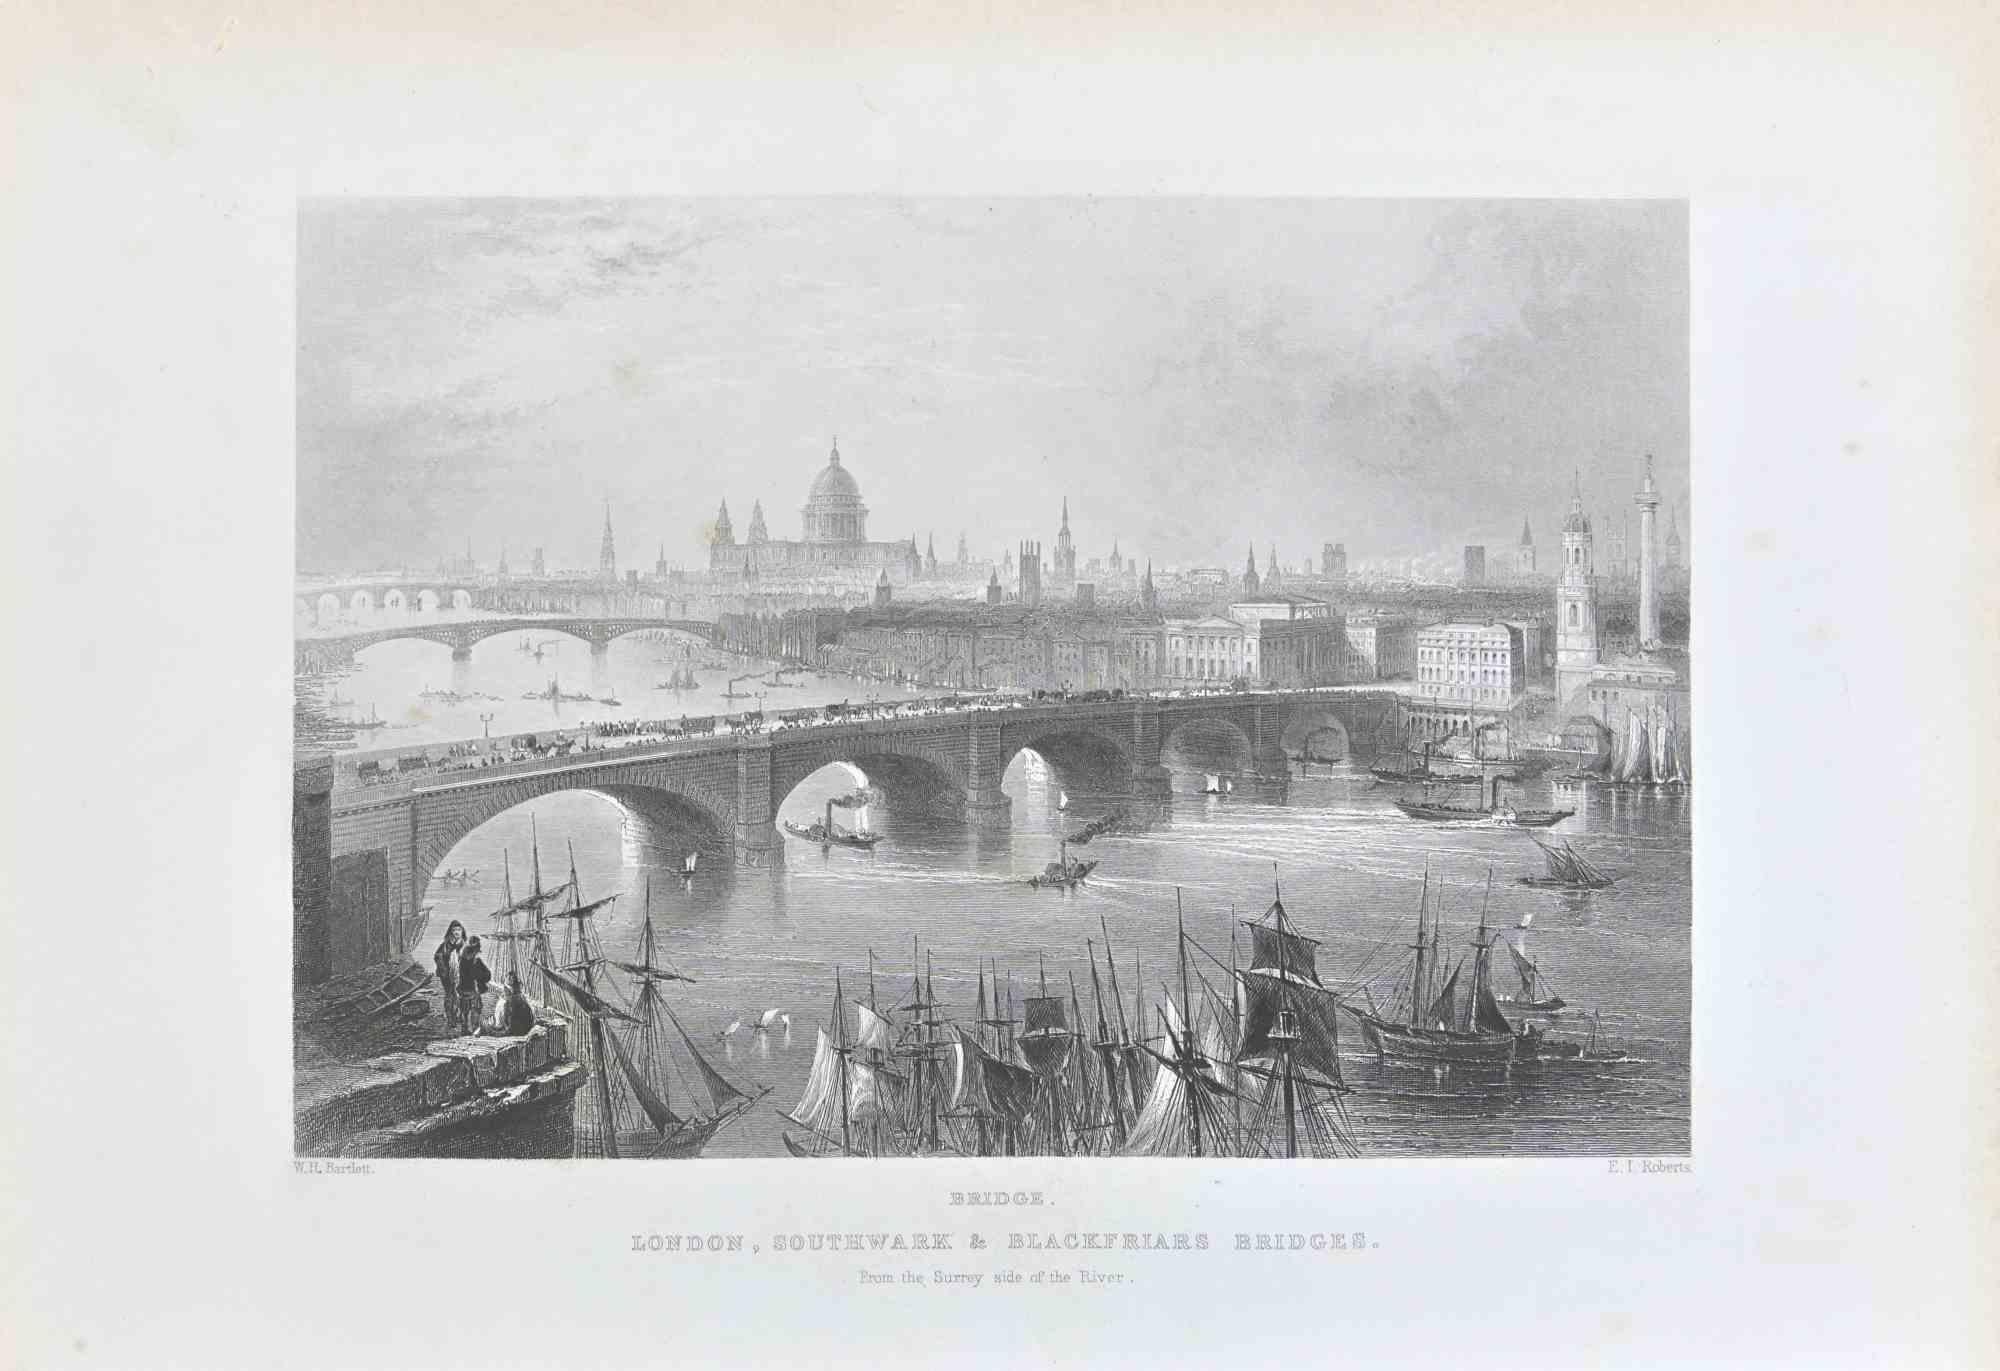 London is an etching realized in 1845 by W. H.Bartlett.

Signed on the plate. 

Titled on the lower center.

Good conditions with slight foxing.

The artwork is beautifully realized in a well-balanced composition through short, deft strokes.